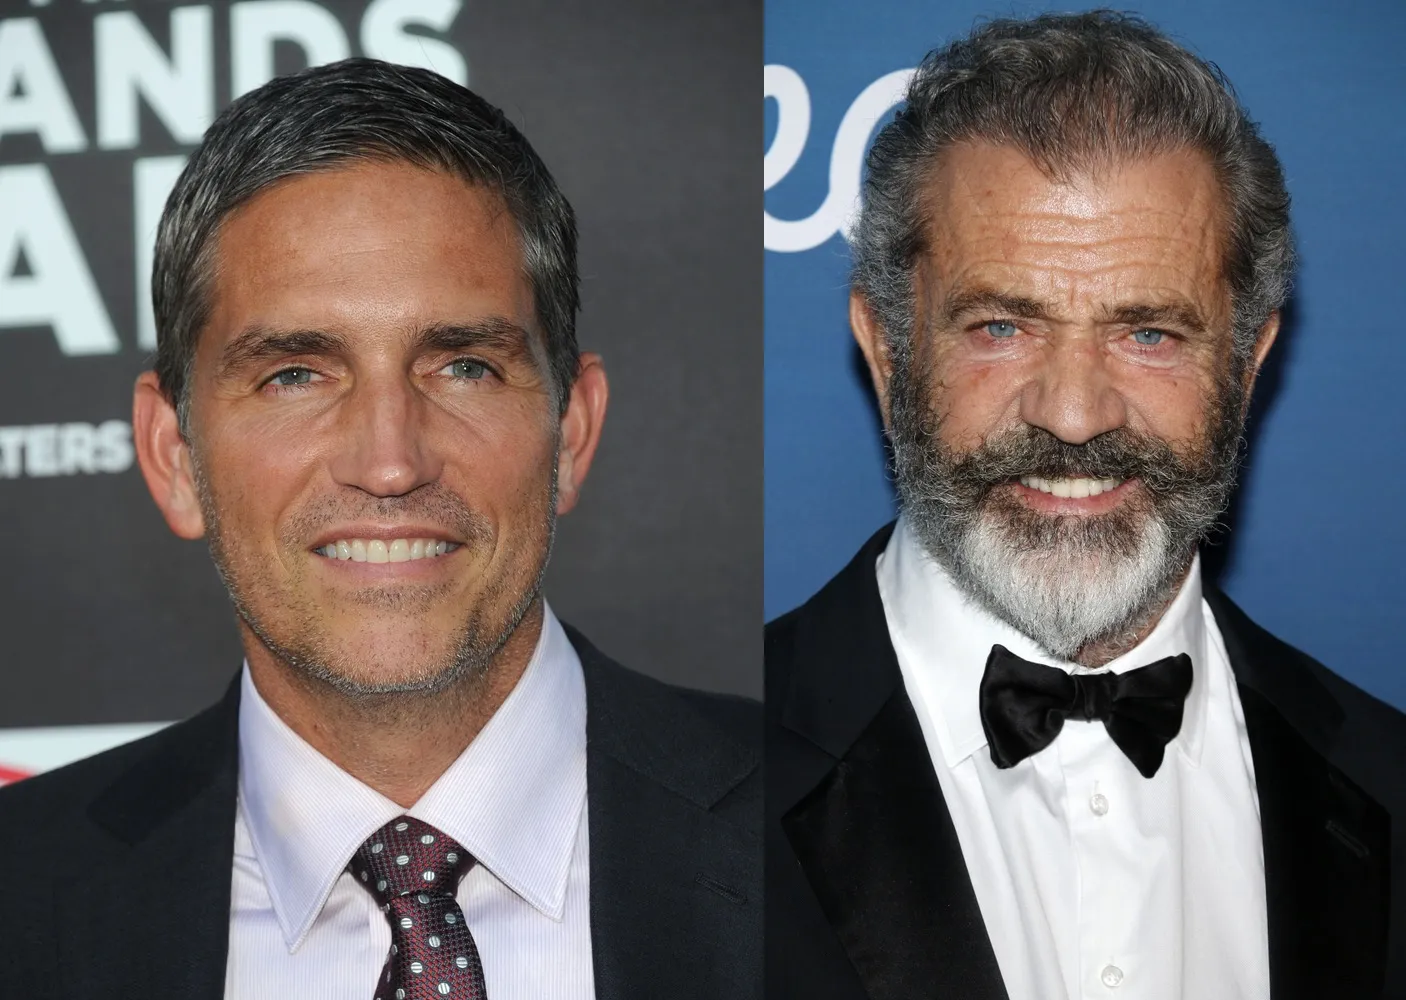 Jim Caviezel (left) will once again portray Jesus in the new Mel Gibson movie "The Passion of the Christ: Resurrection," which is set to begin production in spring 2023.?w=200&h=150